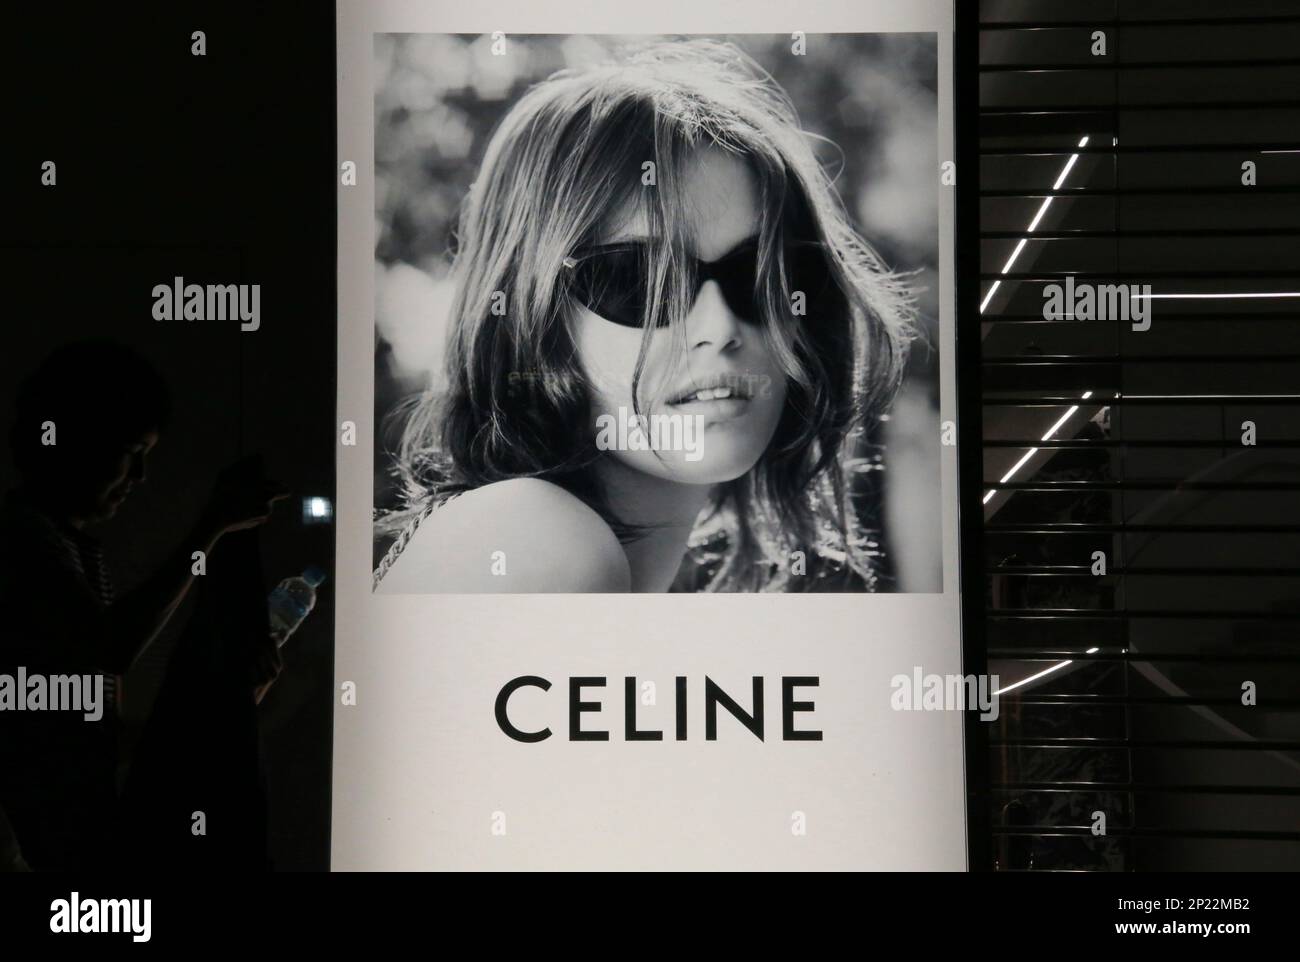 The logo of Celine (Céline) is seen at Omotesando in Minato Ward, Tokyo on  May 30, 2022. Celine (Céline) is a French luxury ready-to-wear and leather goods  brand owned by the LVMH (